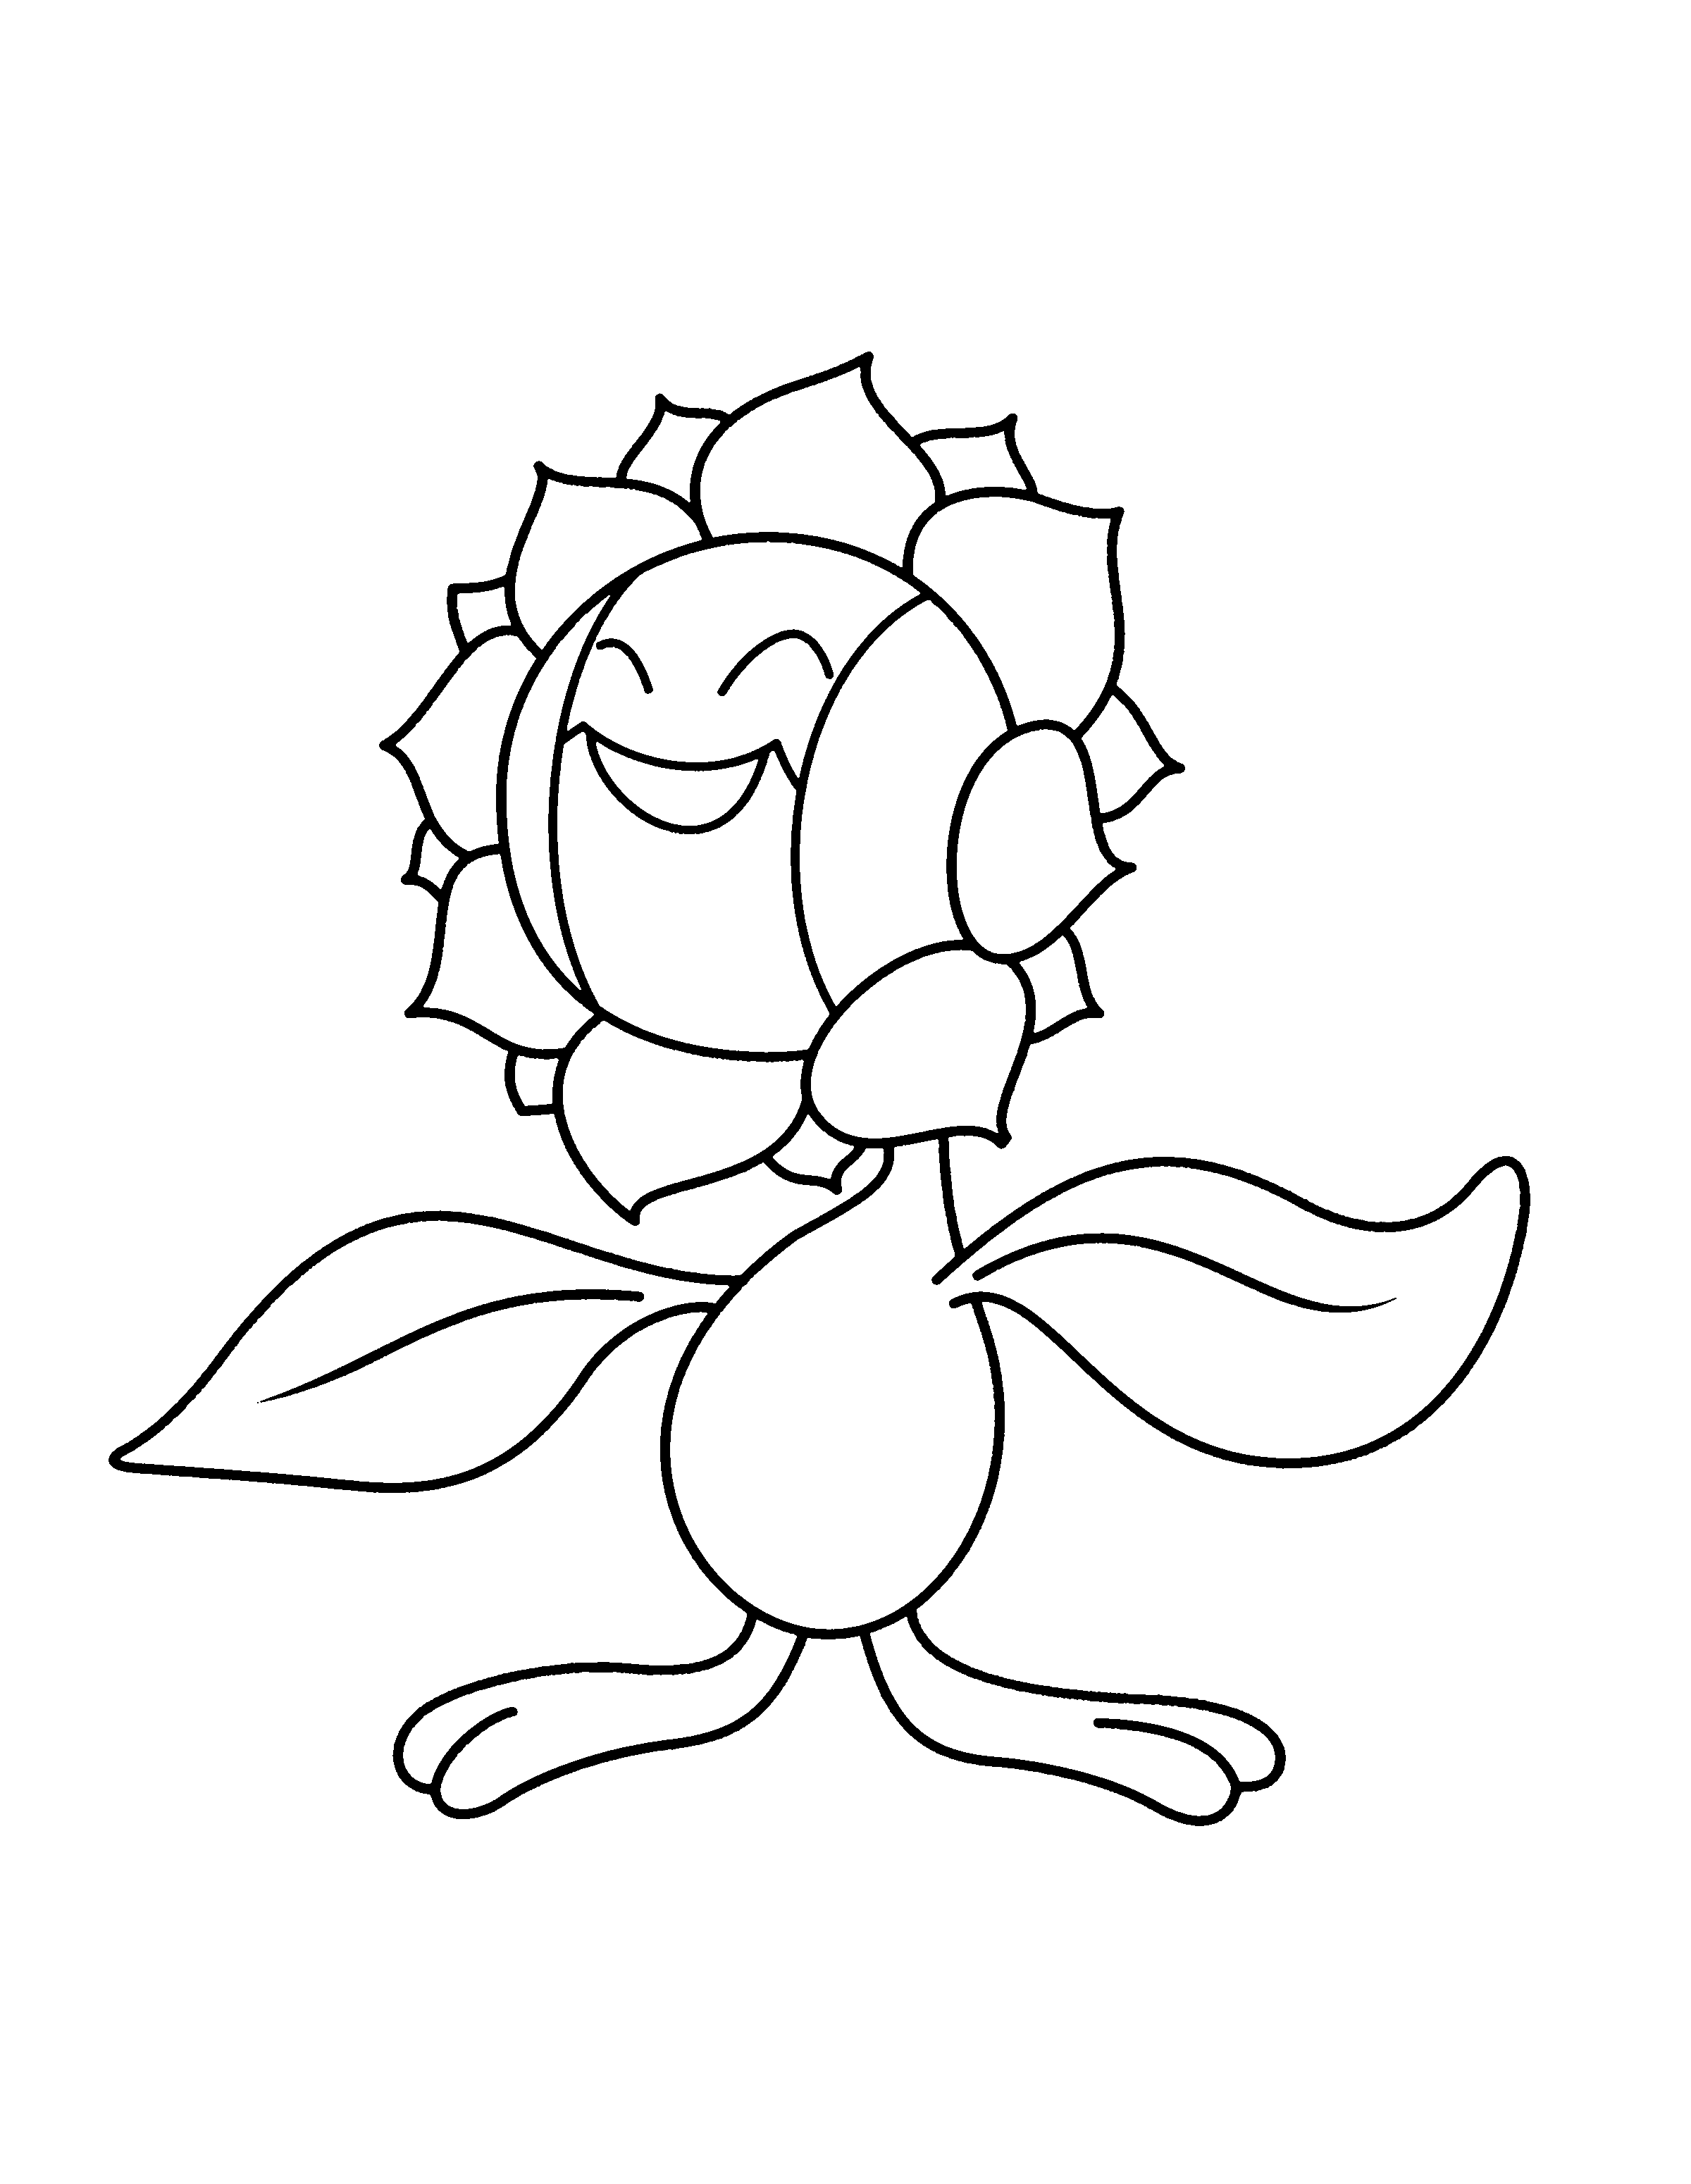 animated-coloring-pages-pokemon-image-0153